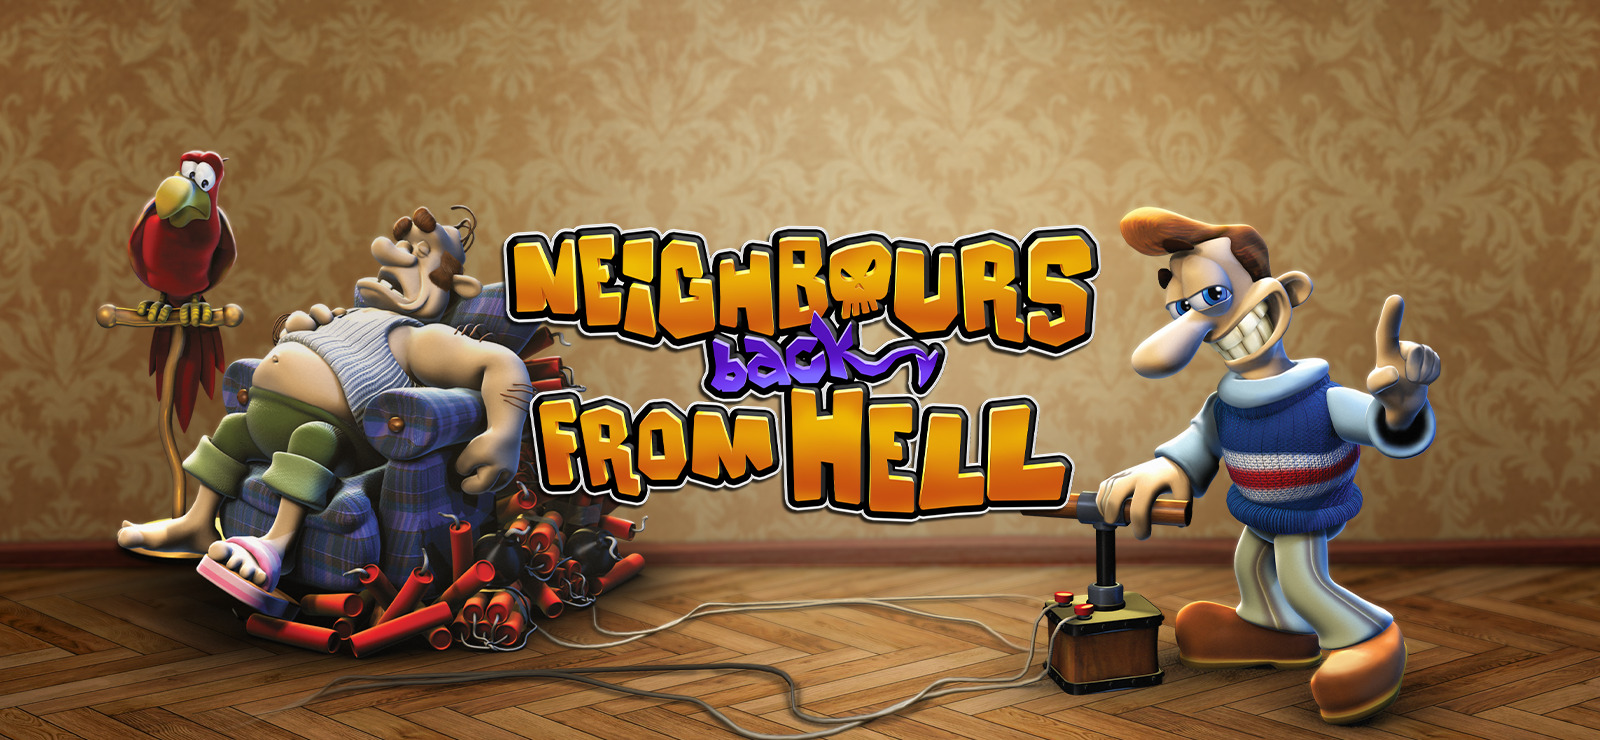 game neighbours from hell 3